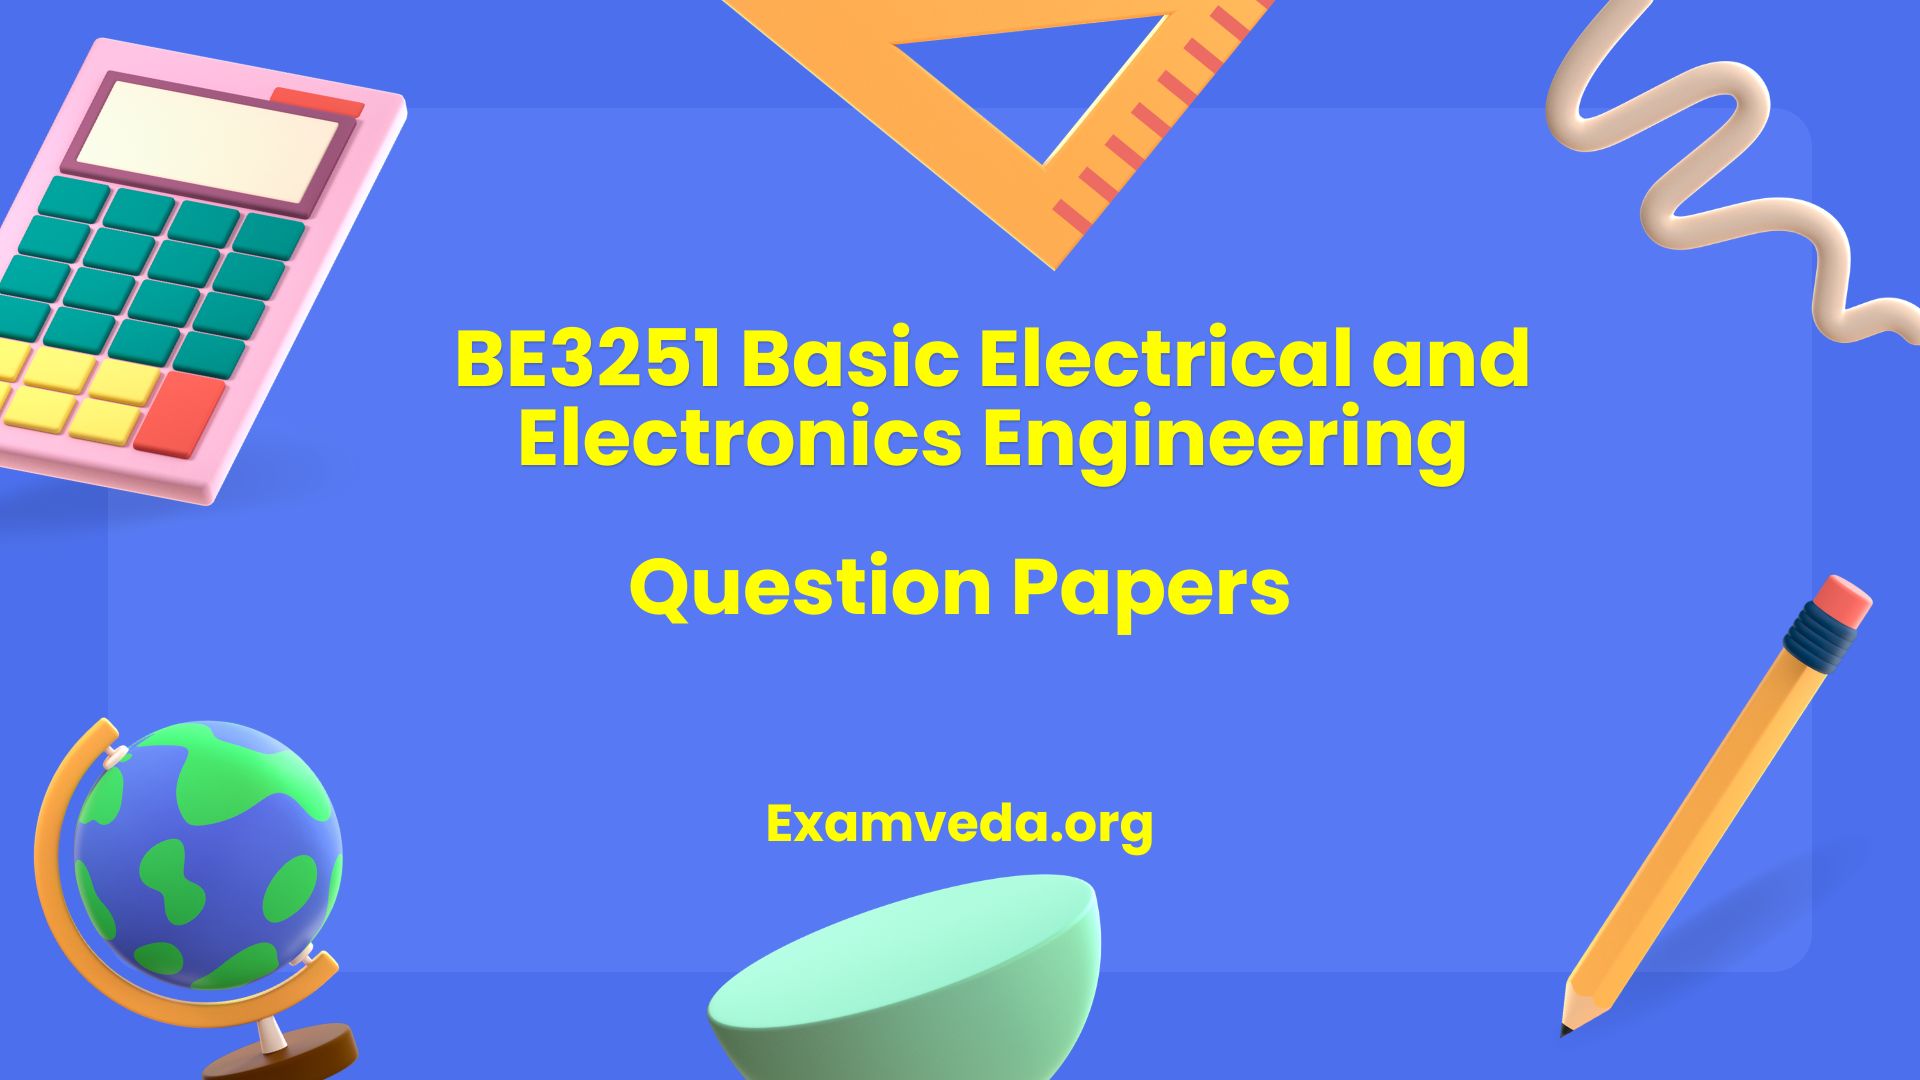 BE3251 Basic Electrical and Electronics Engineering Question Papers